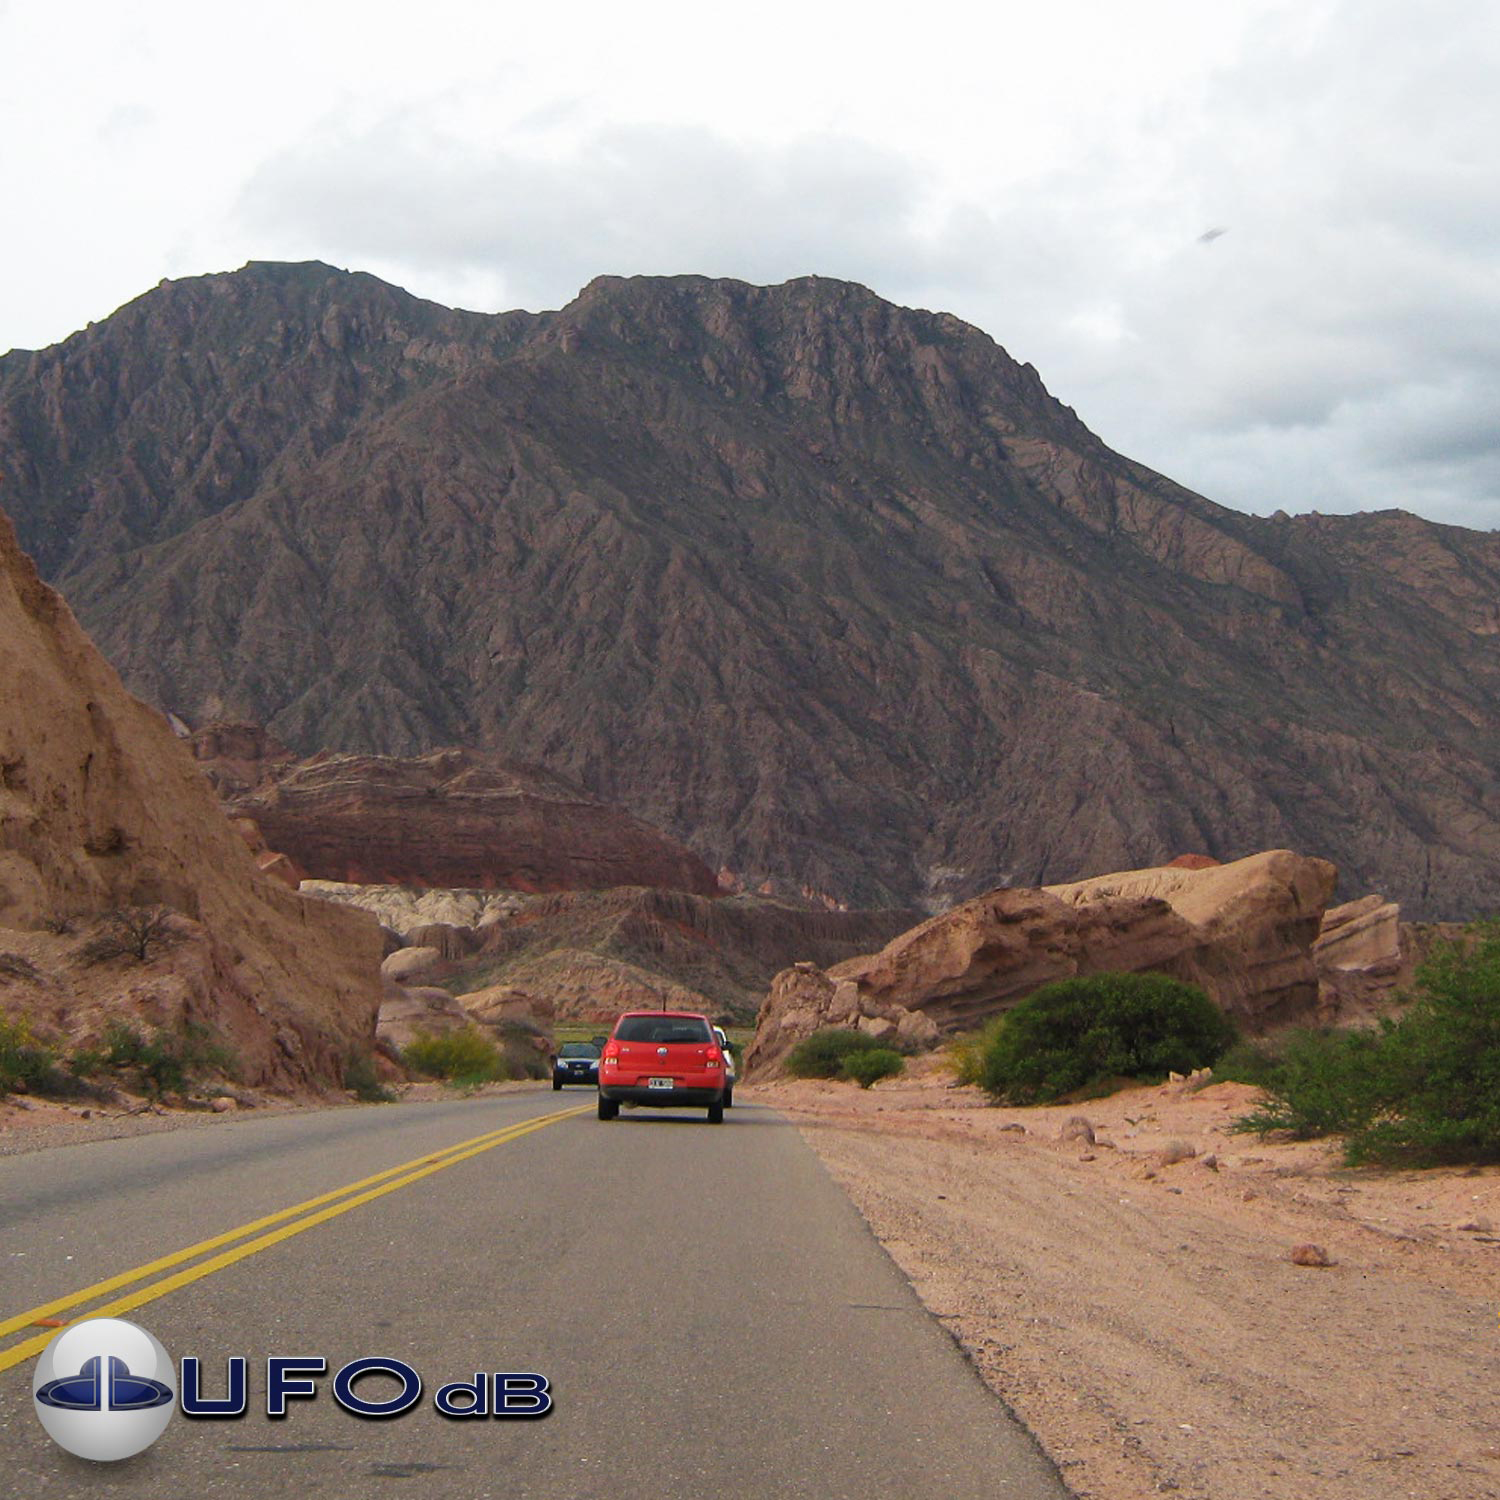 UFO over Mountains near Cafayate, Argentina | Jan 9 2011 UFO Picture UFO Picture #240-1